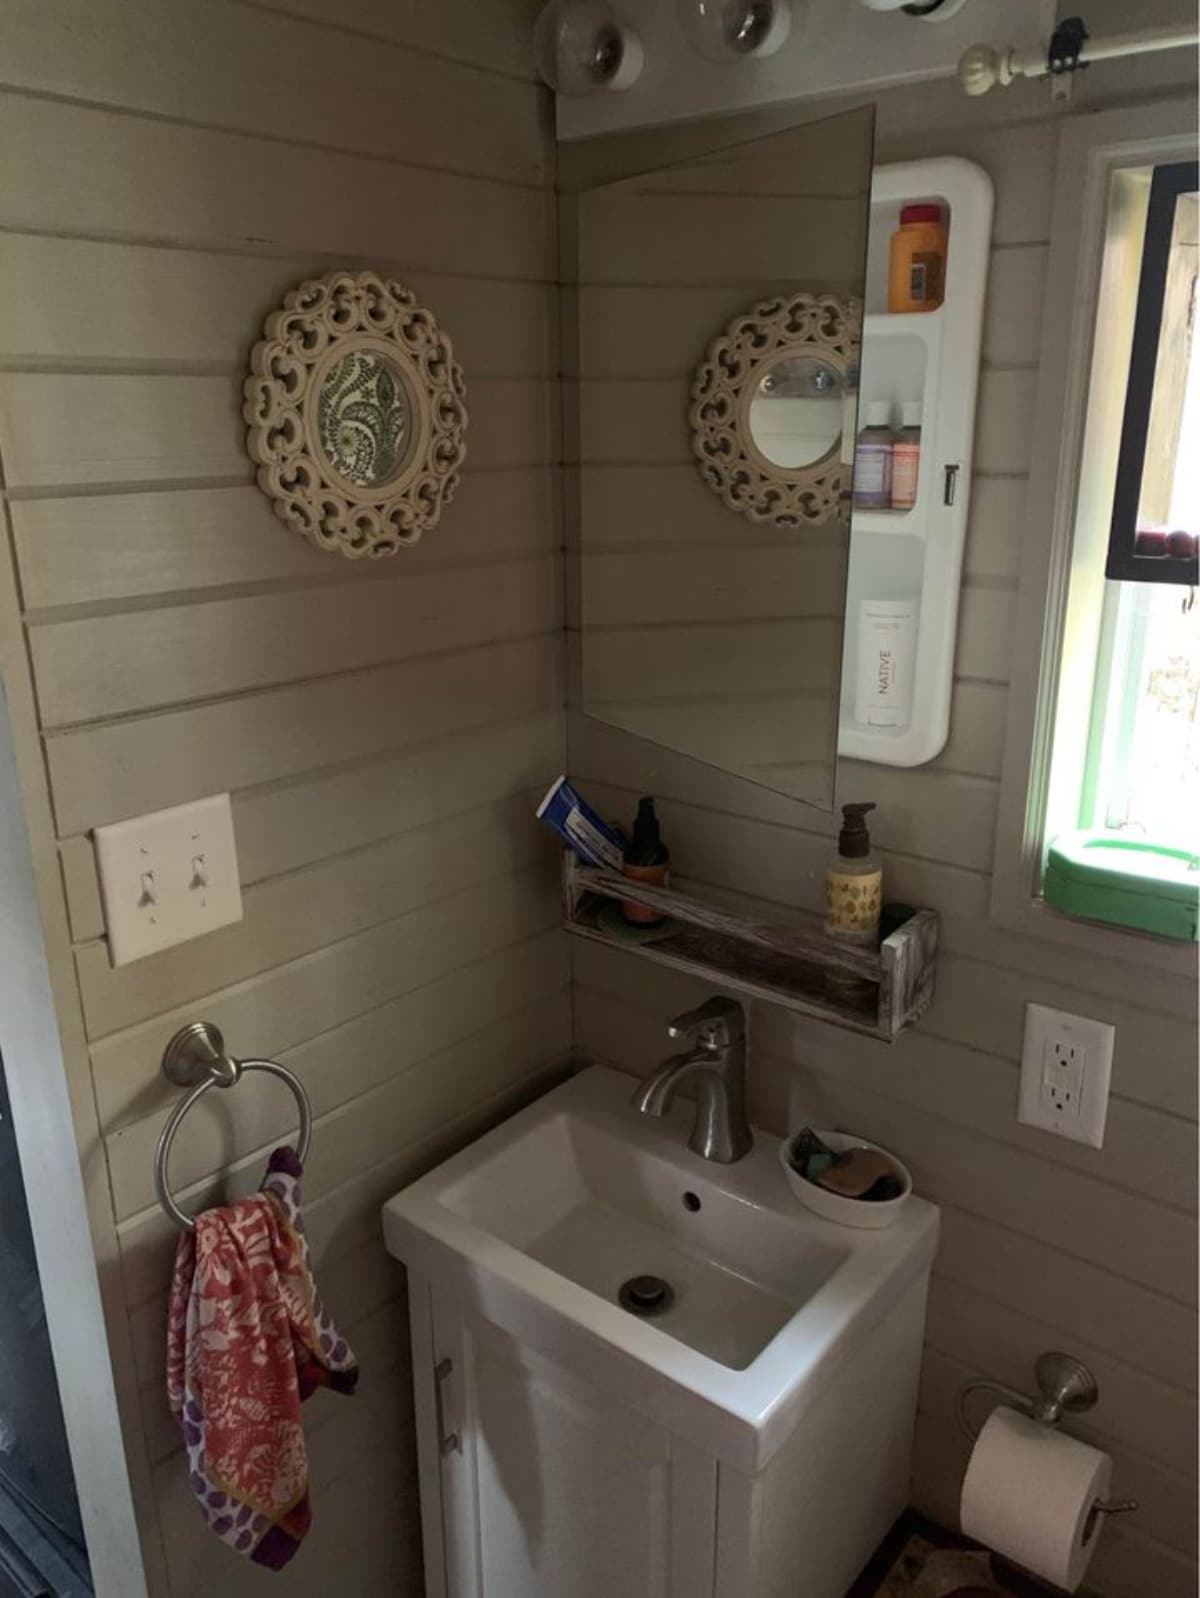 Mirror and sink in bathroom of 180 sf Adorable Tiny House on Wheels